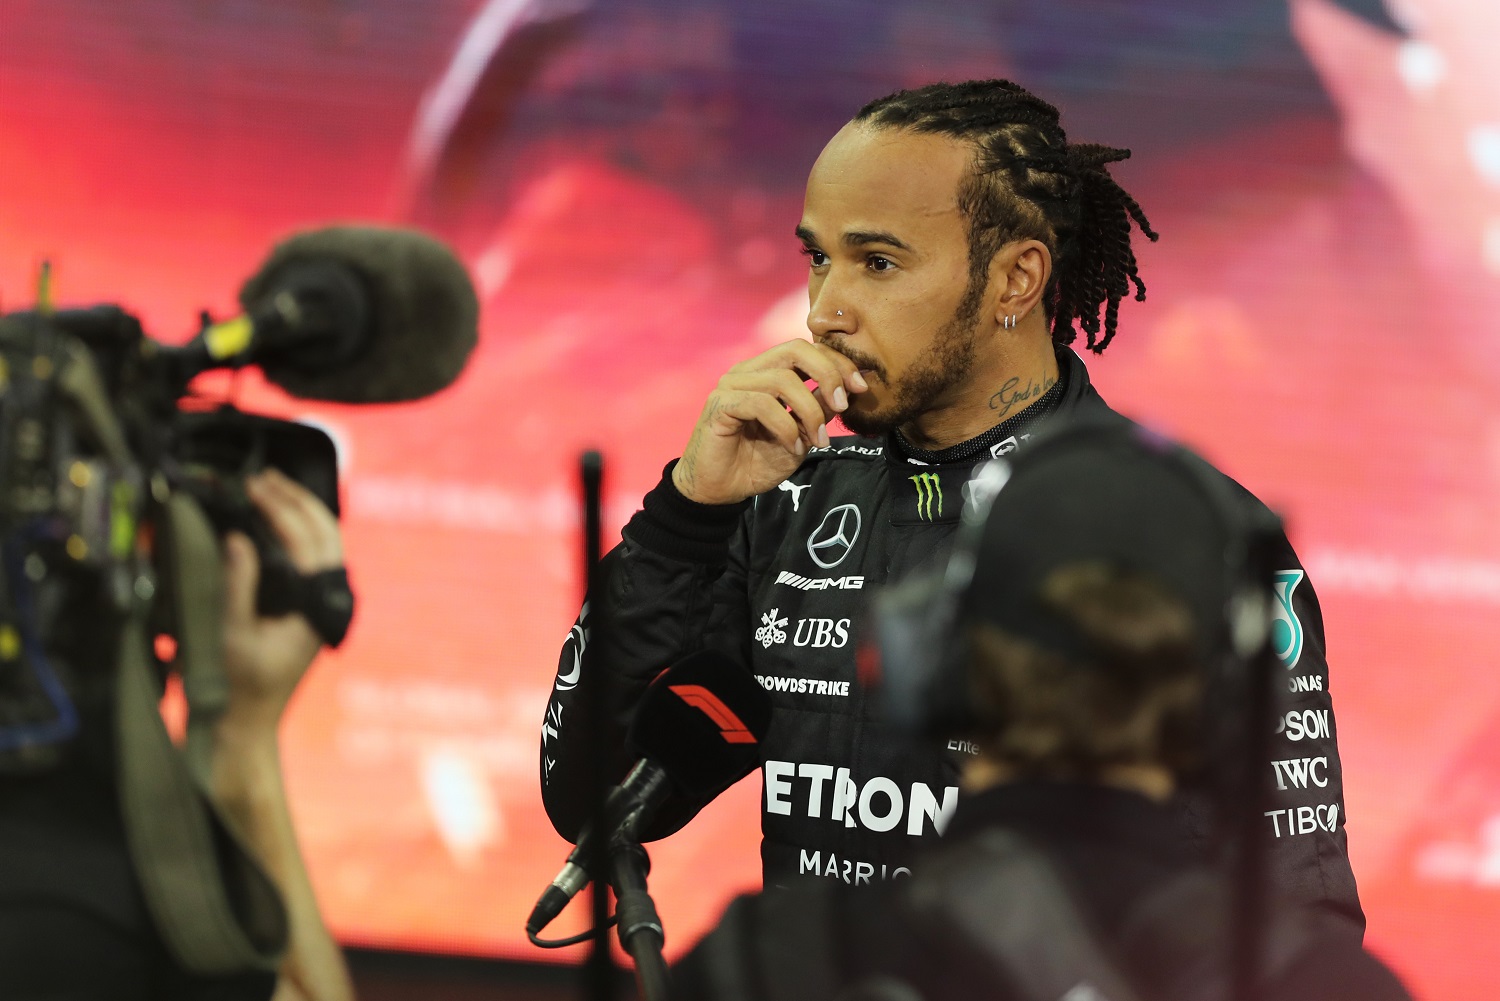 Lewis Hamilton Lost the Formula 1 Title to Max Verstappen but Ditched a $44 Million Problem Half a World Away